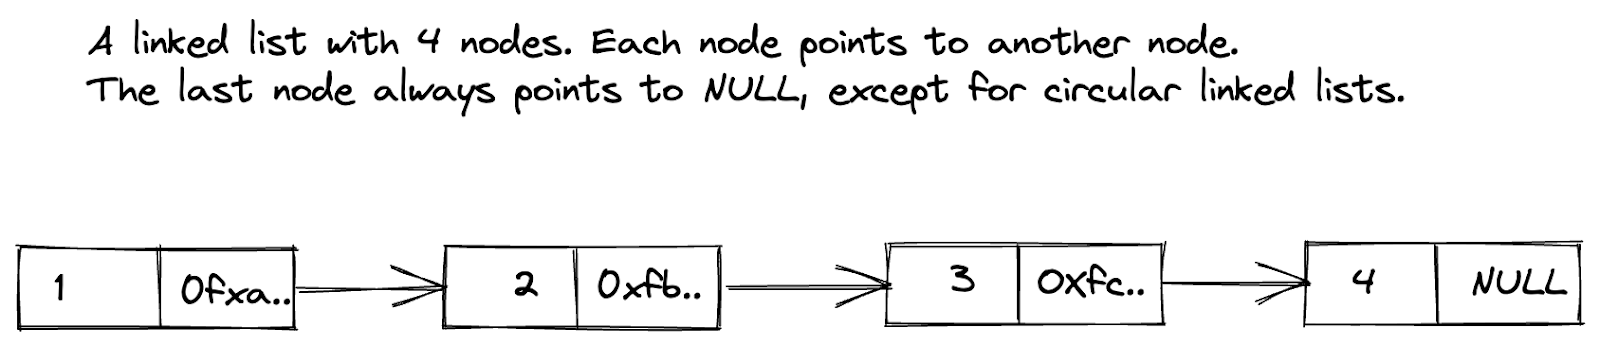 A linked list with 4 nodes. Each node points to another node.
The last node always points to NULL, except for circular linked lists.